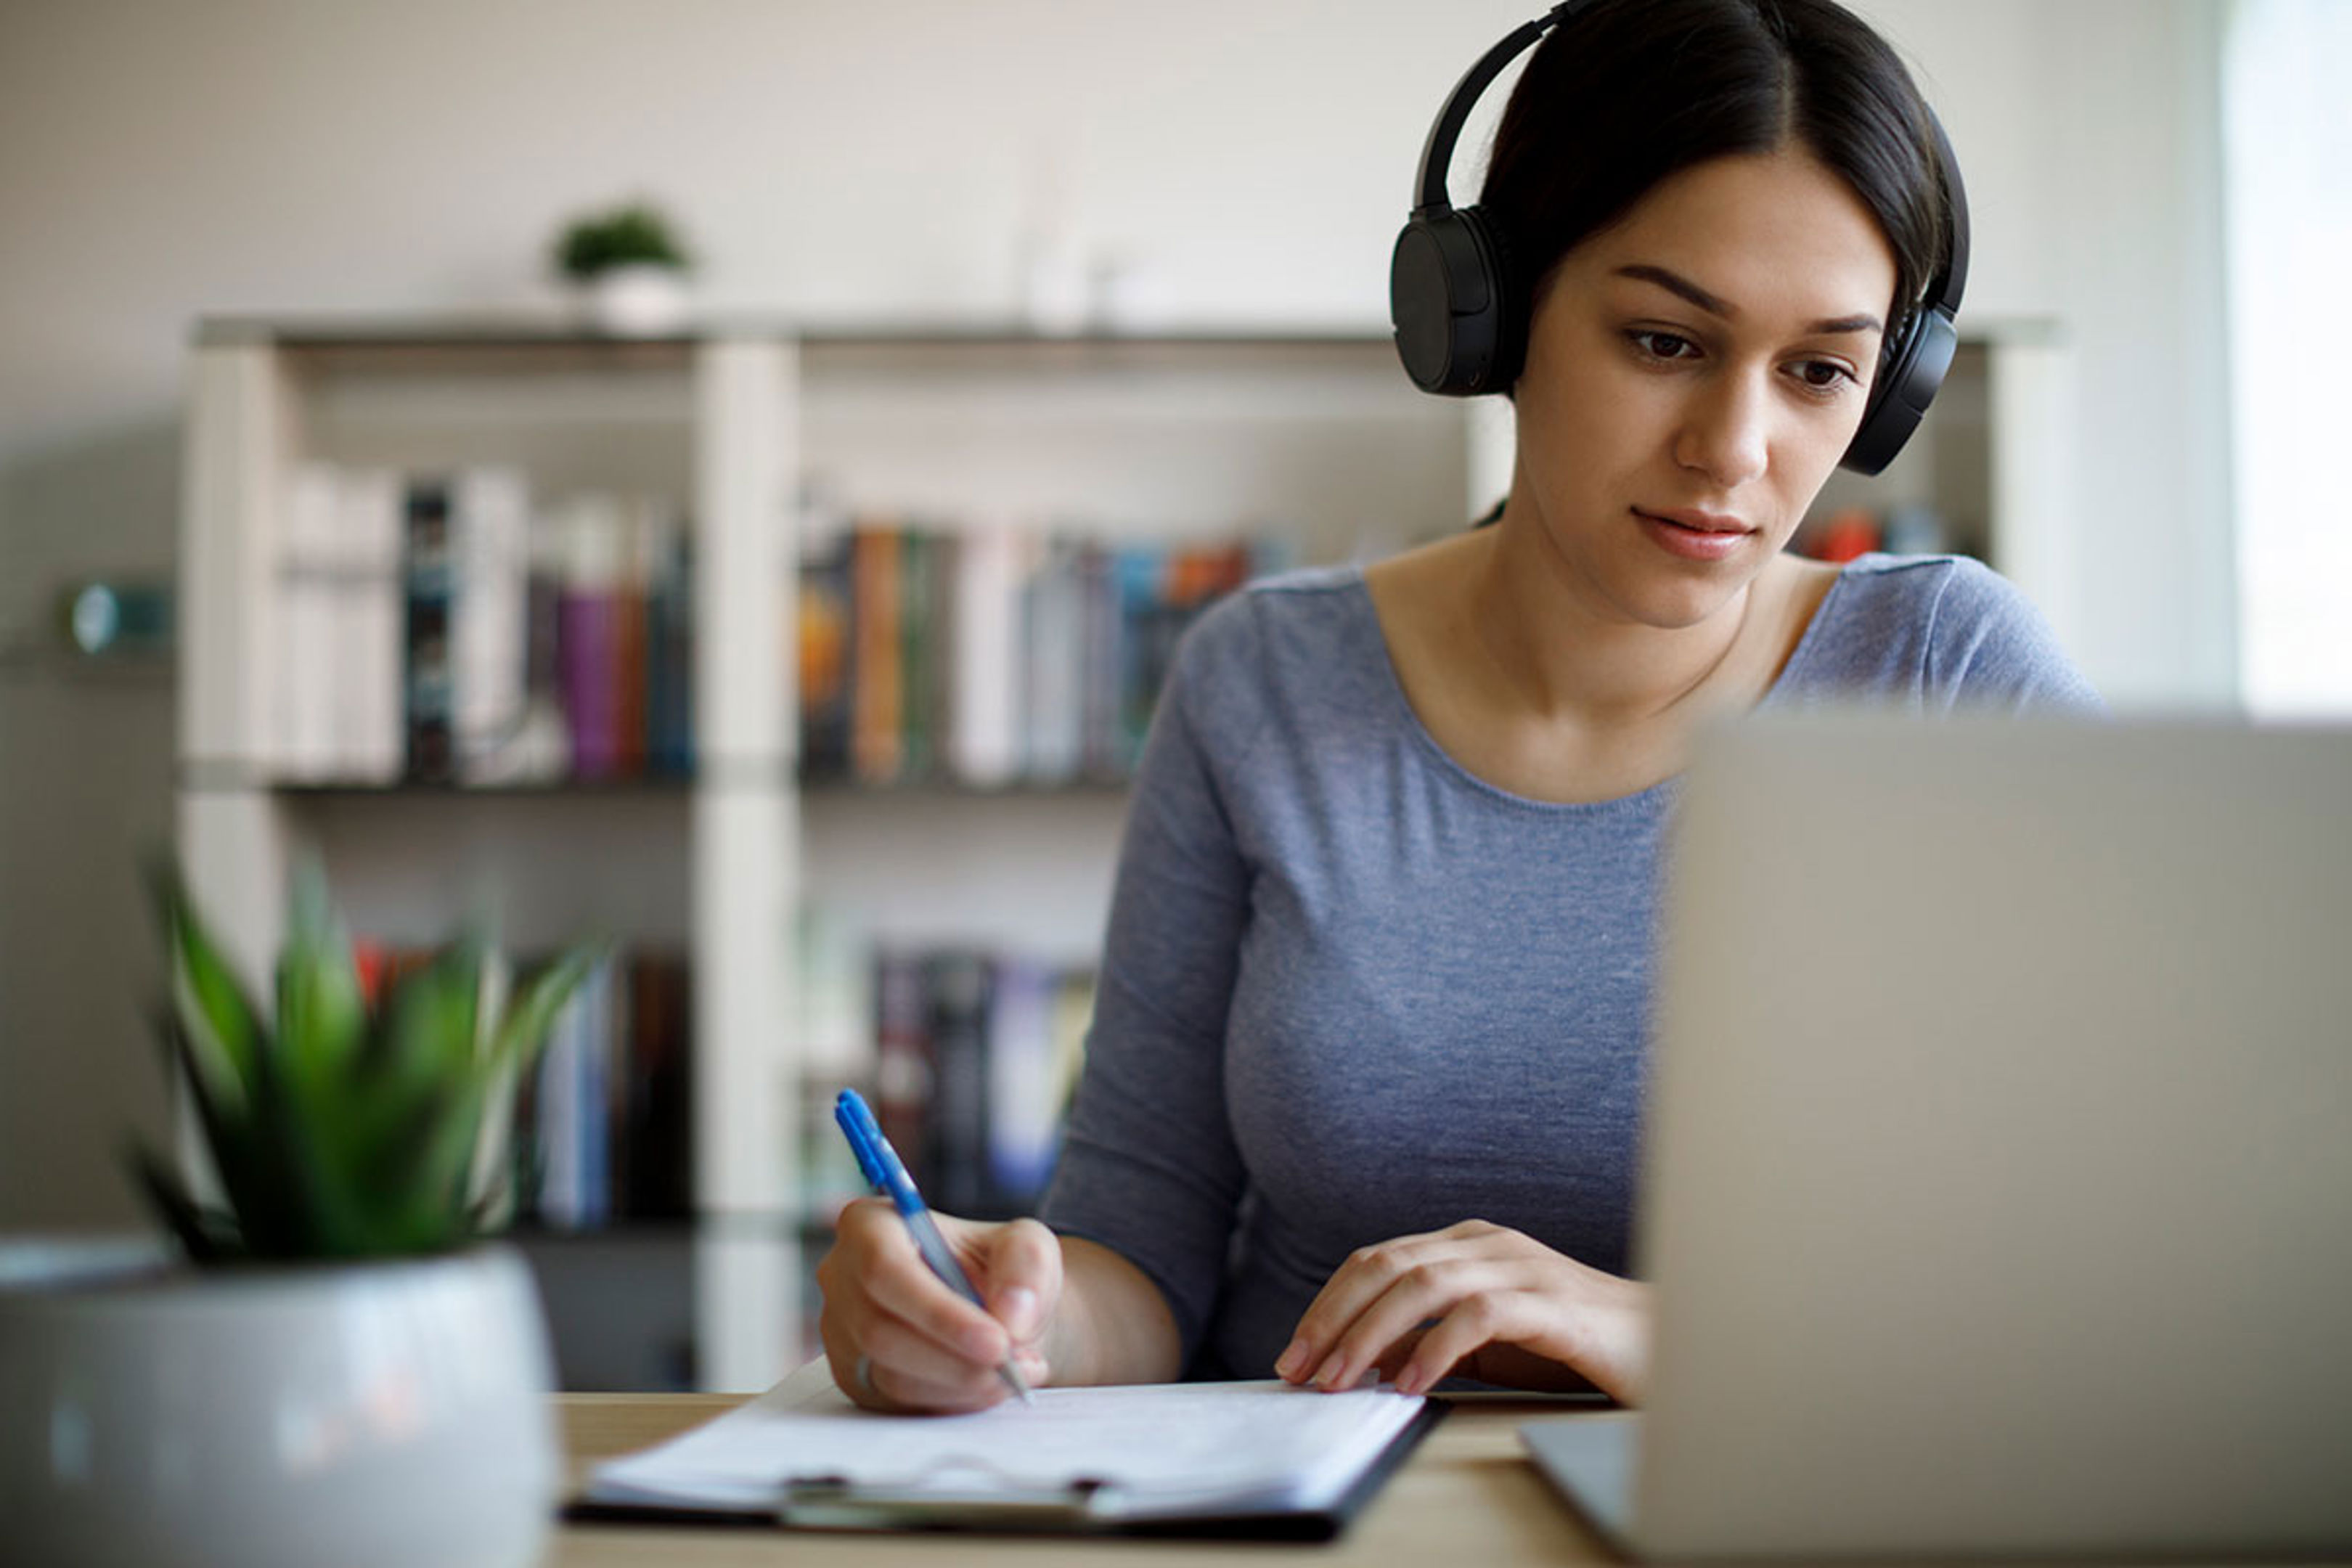 Woman working with headphones on